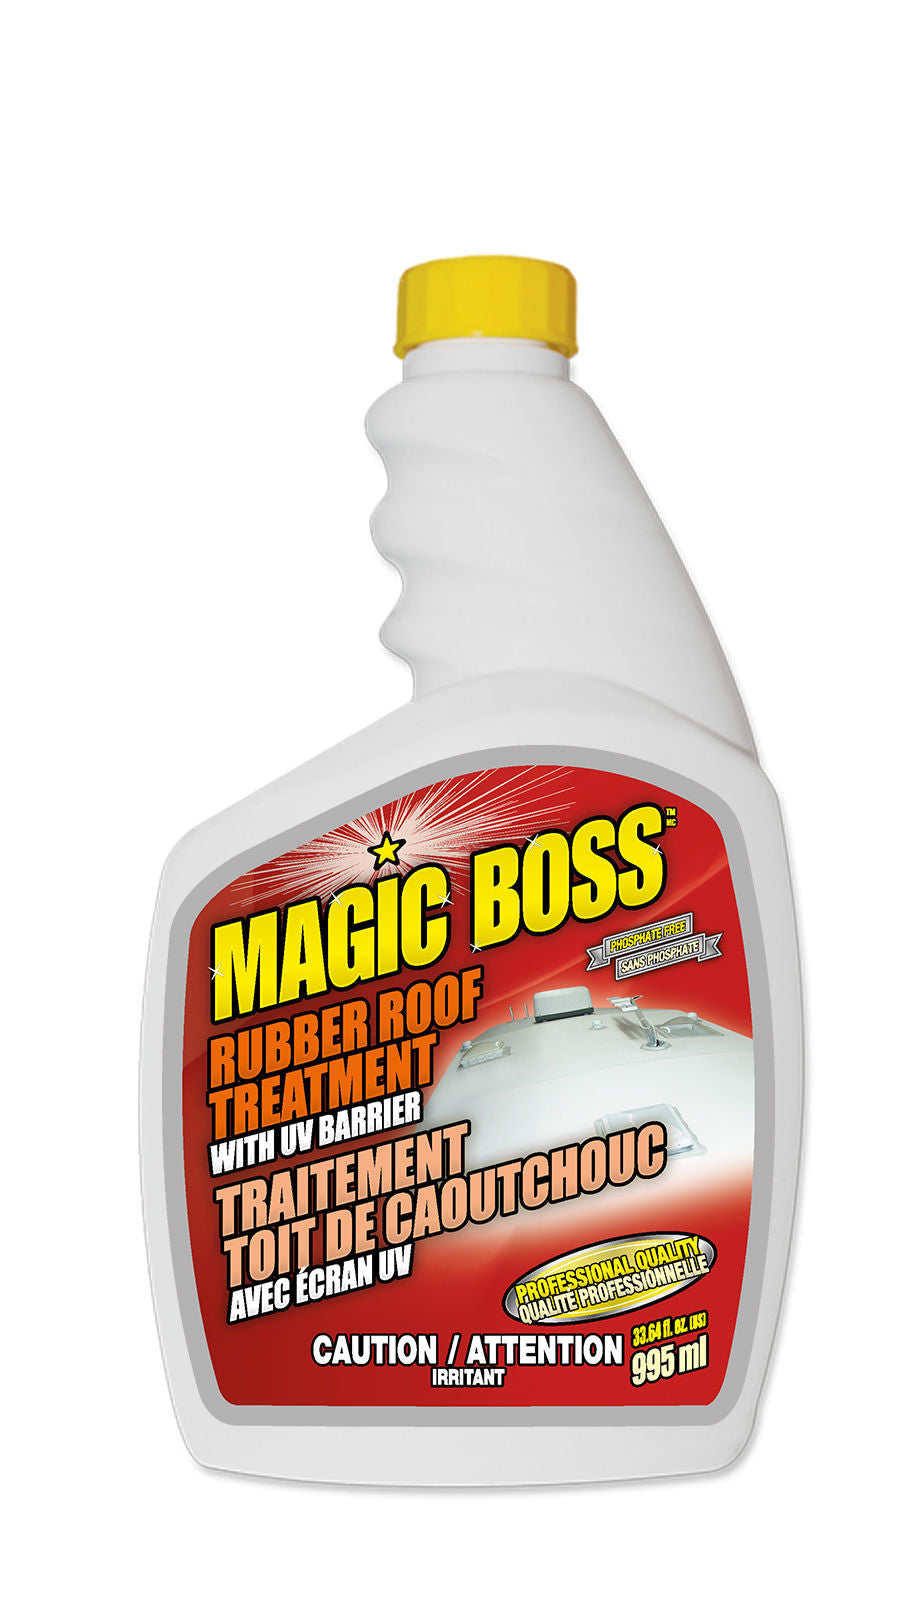 Magic Boss 1793 - Rubber Roof Treatment with UV Barrier (995 ml)